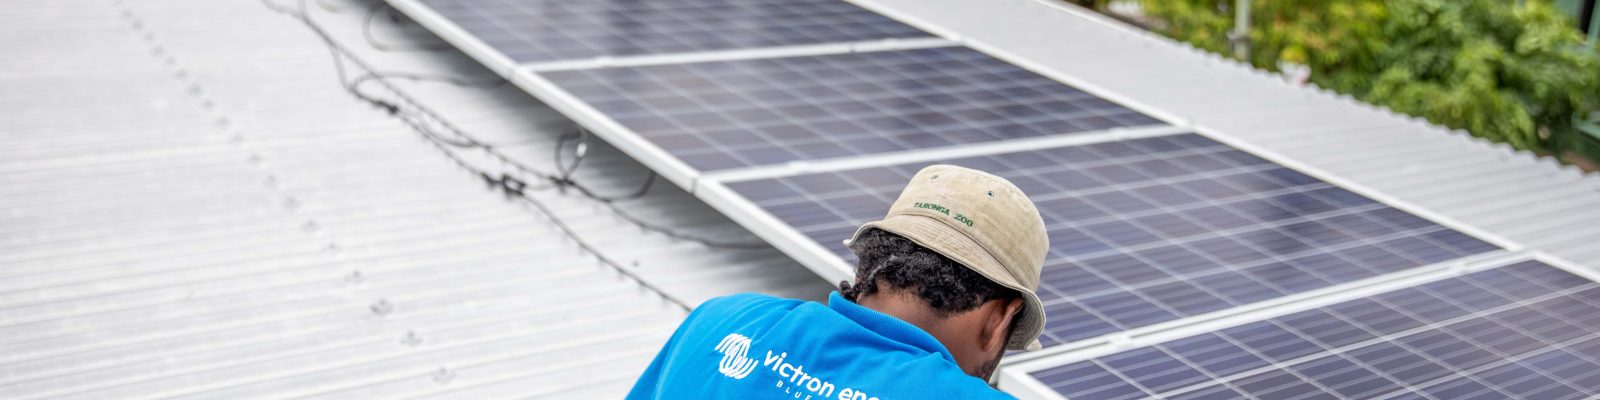 Solar System Installation Completed in Nananu-i-Ra